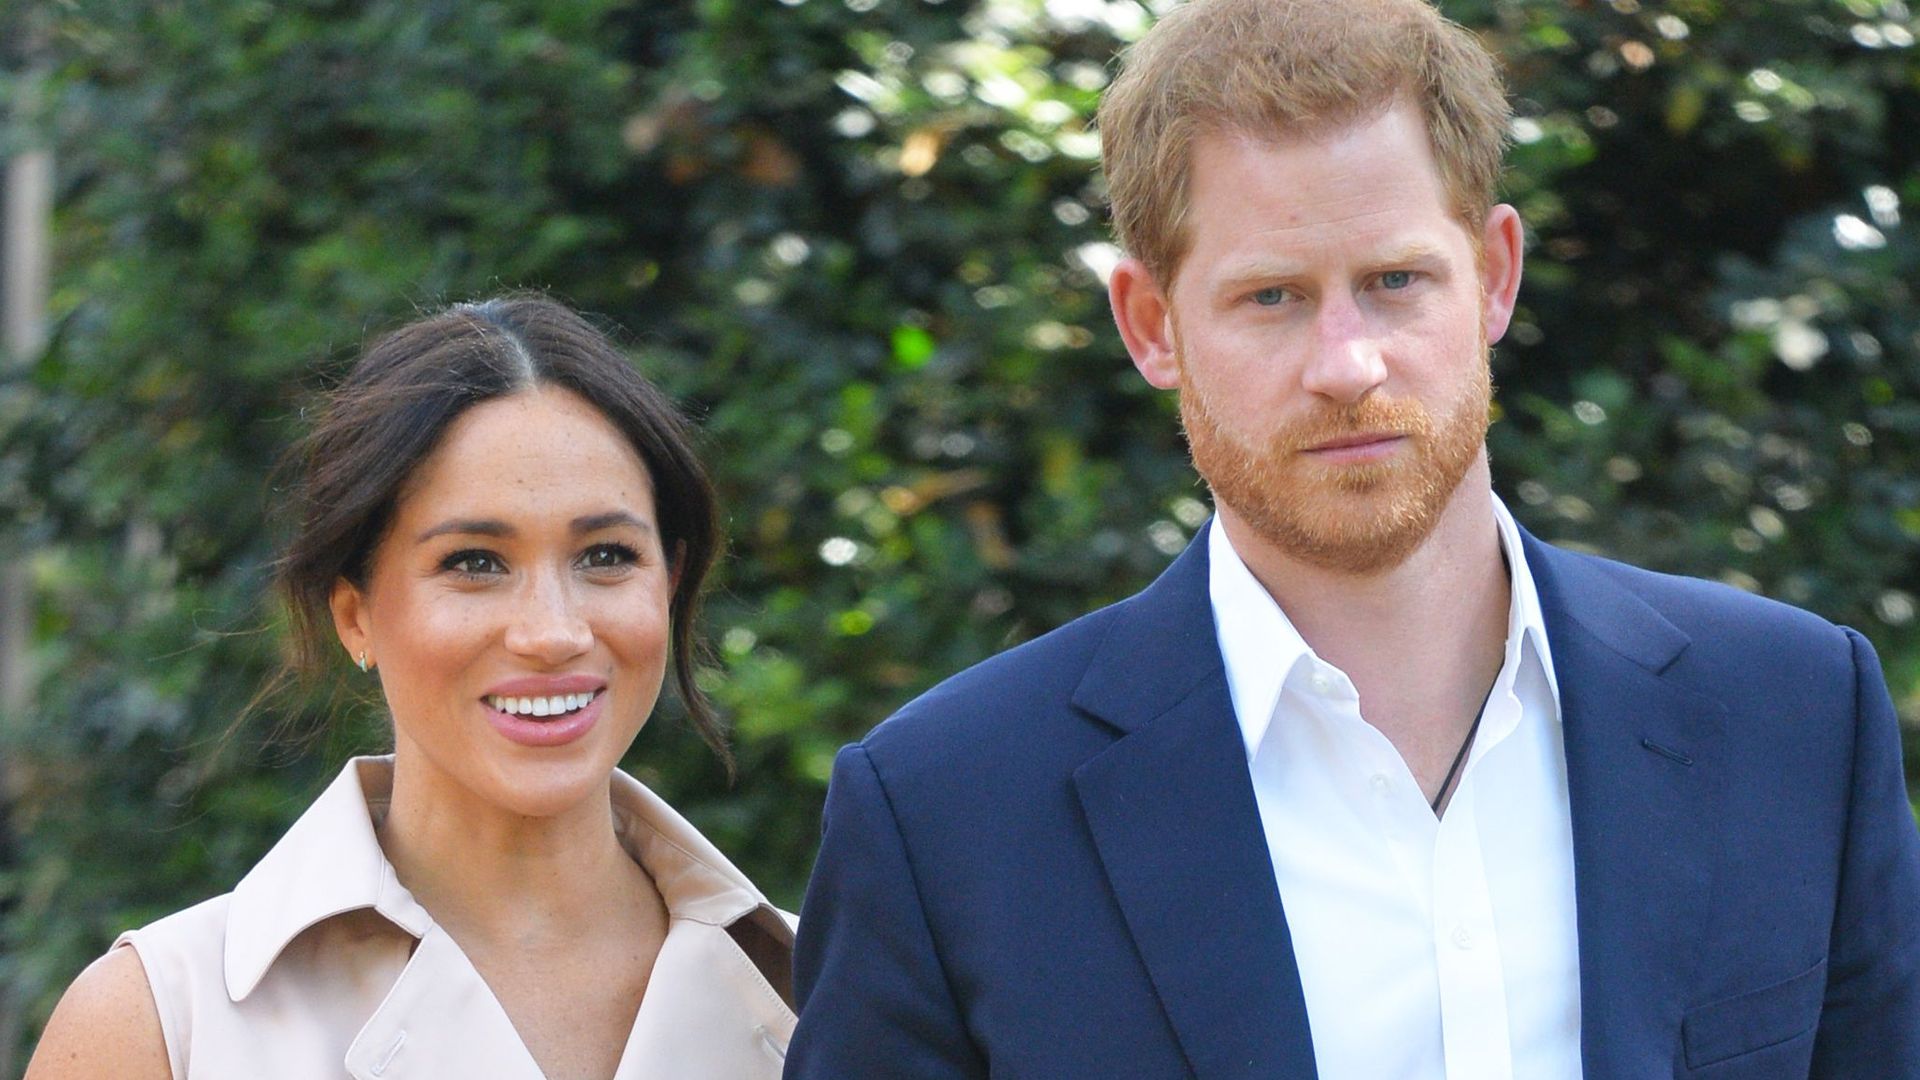 Prince Archie is a country boy in private home photos with Prince Harry and Meghan Markle